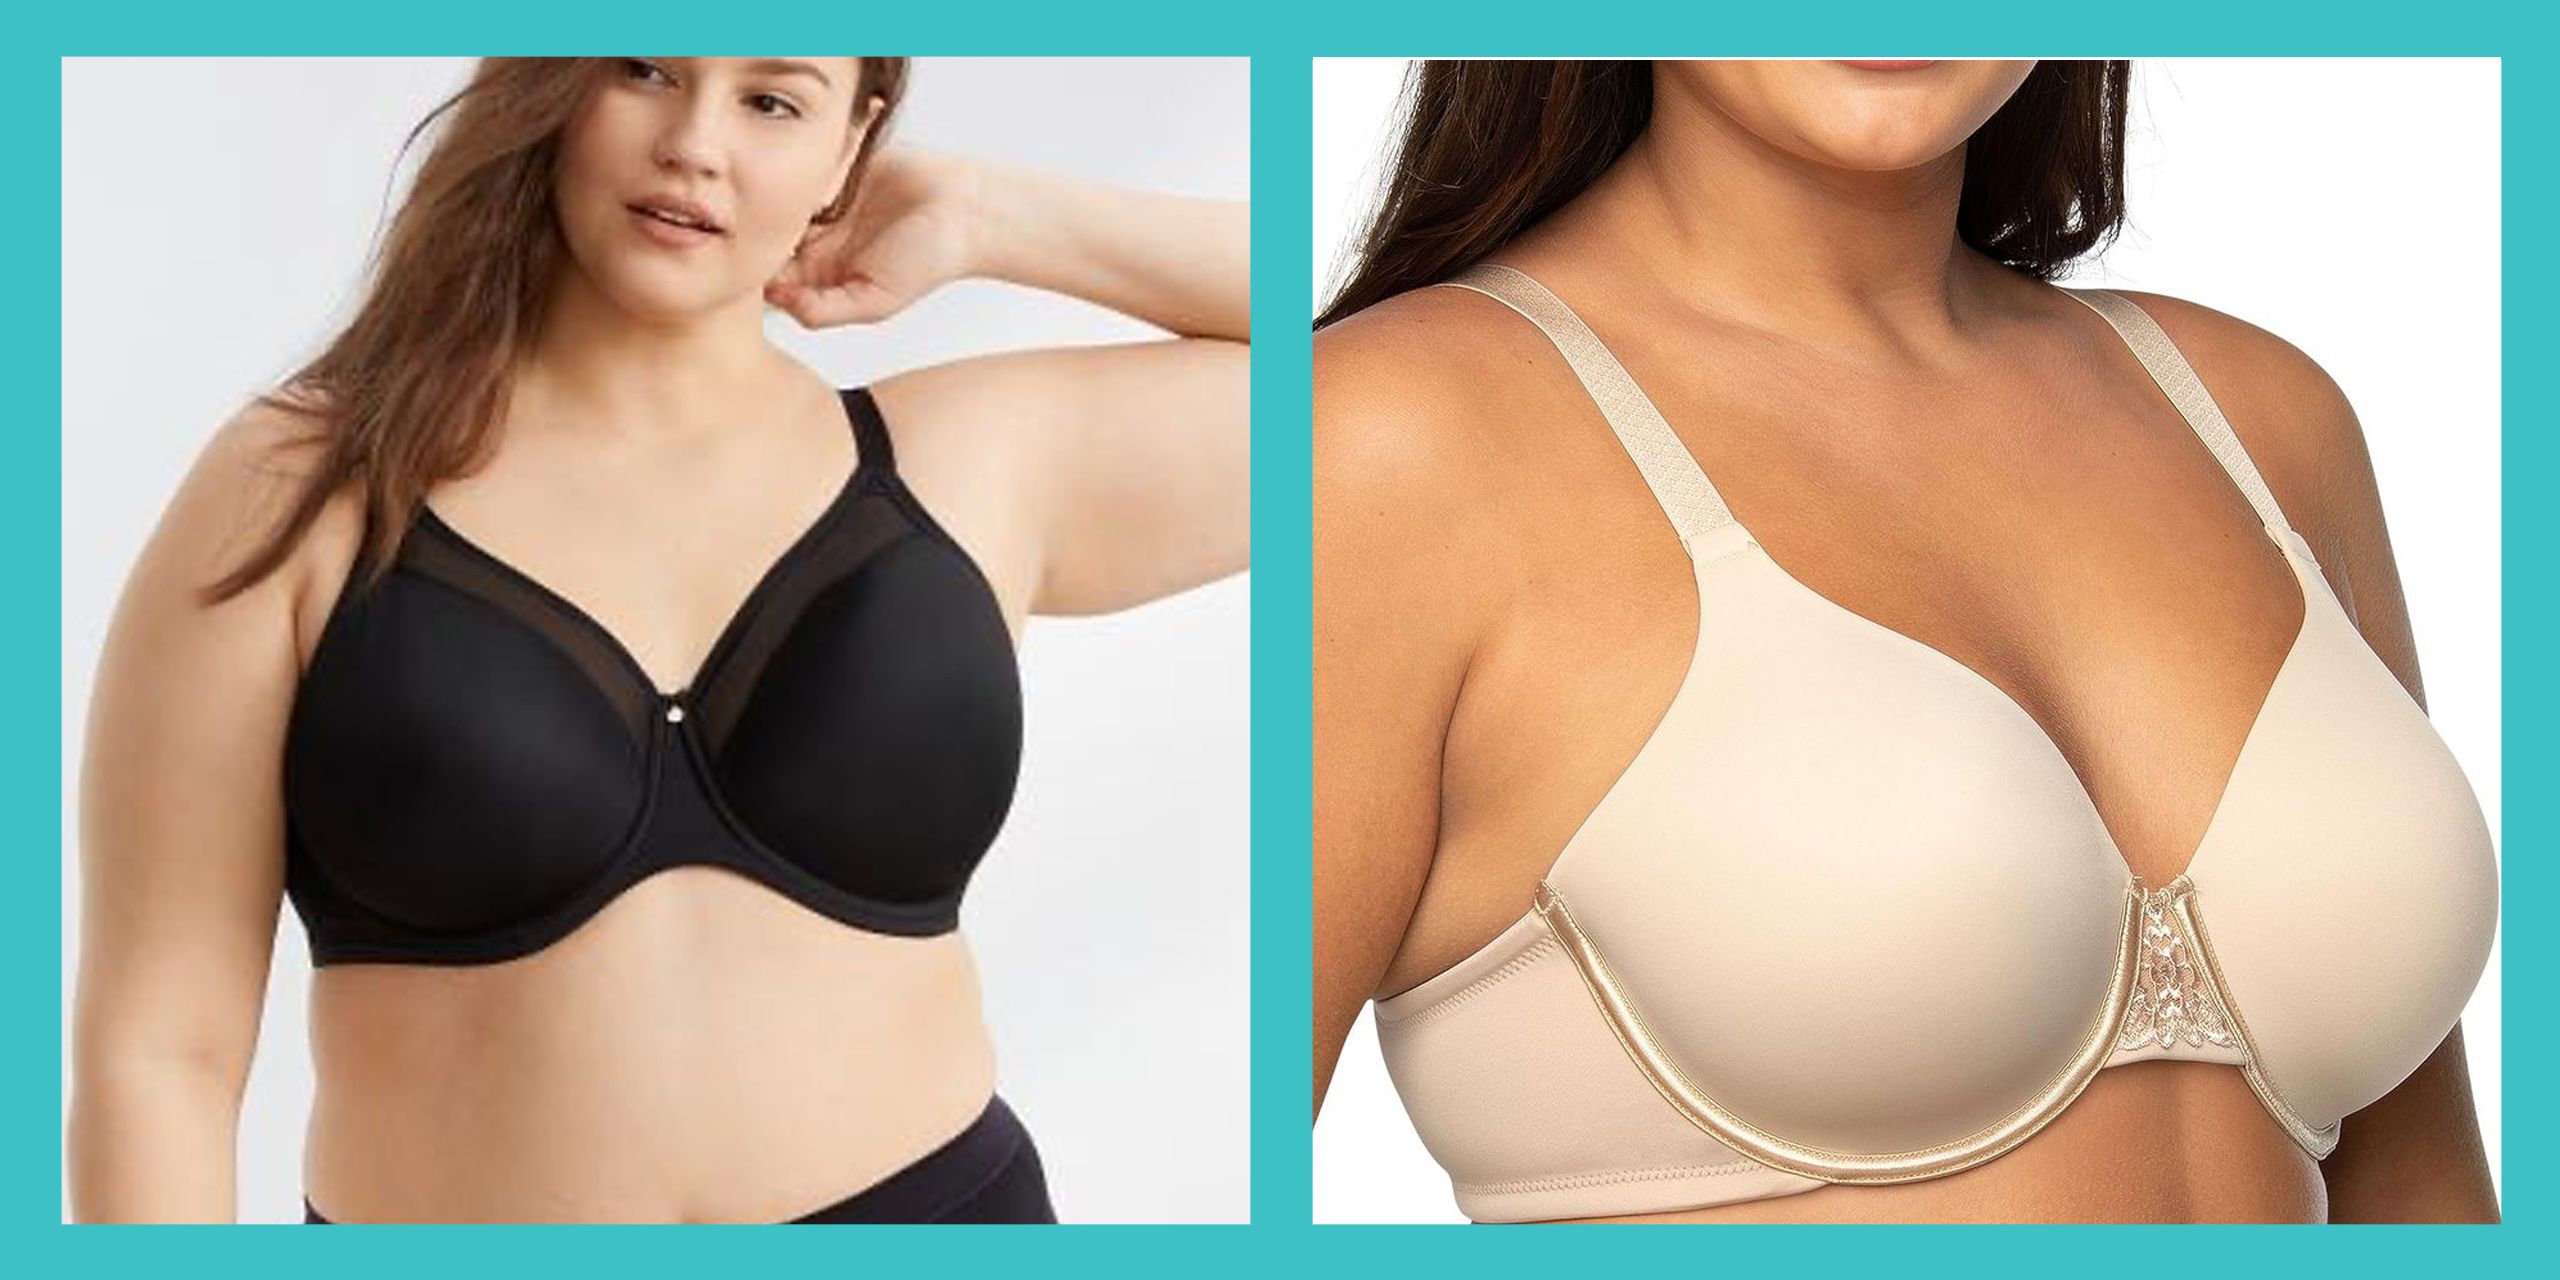 The Best Bras to Buy After Breast Surgery